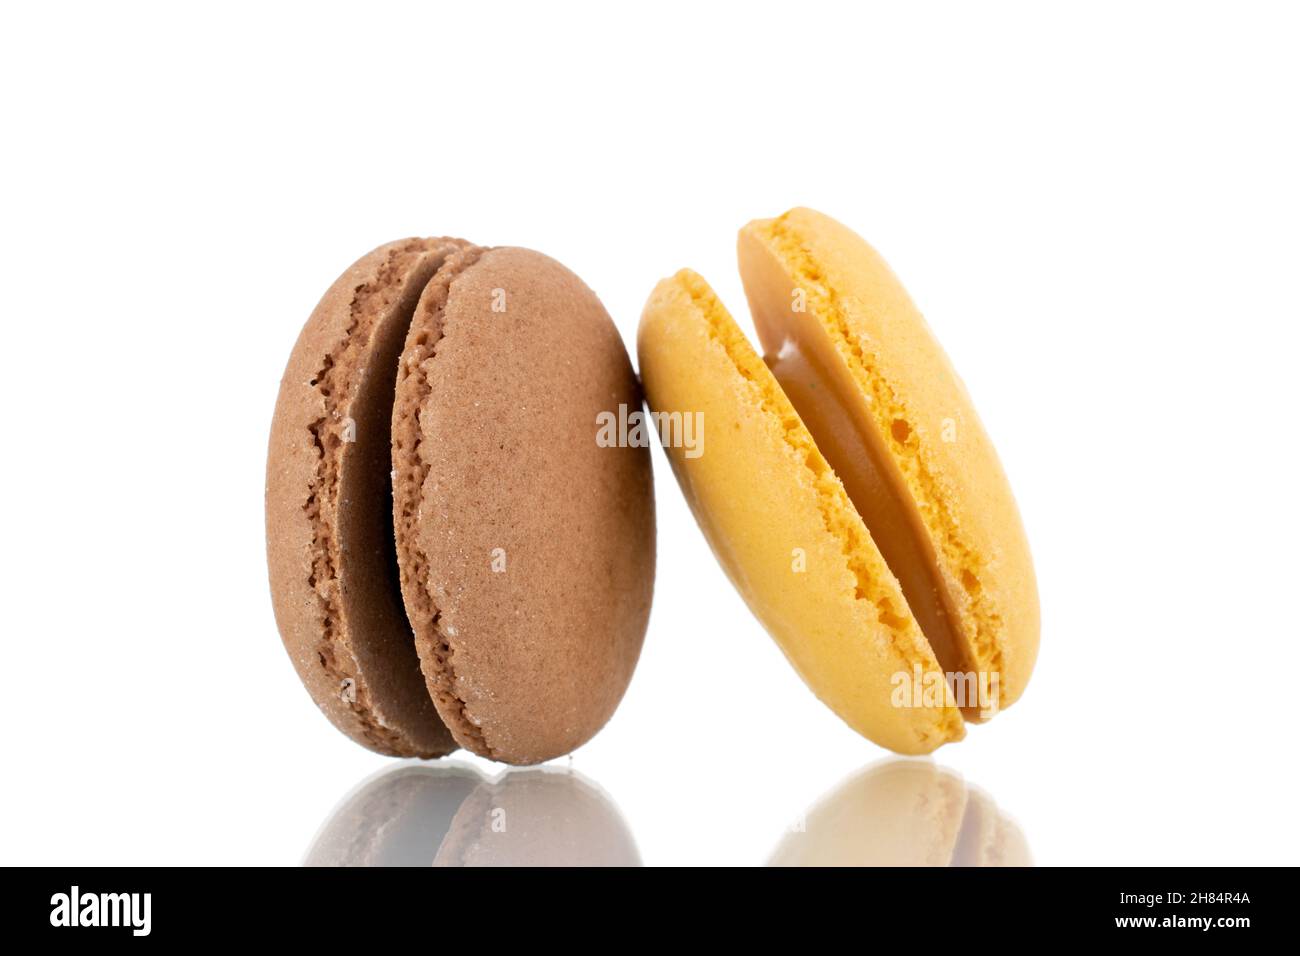 Two sweet macaroons, close-up, isolated on white. Stock Photo